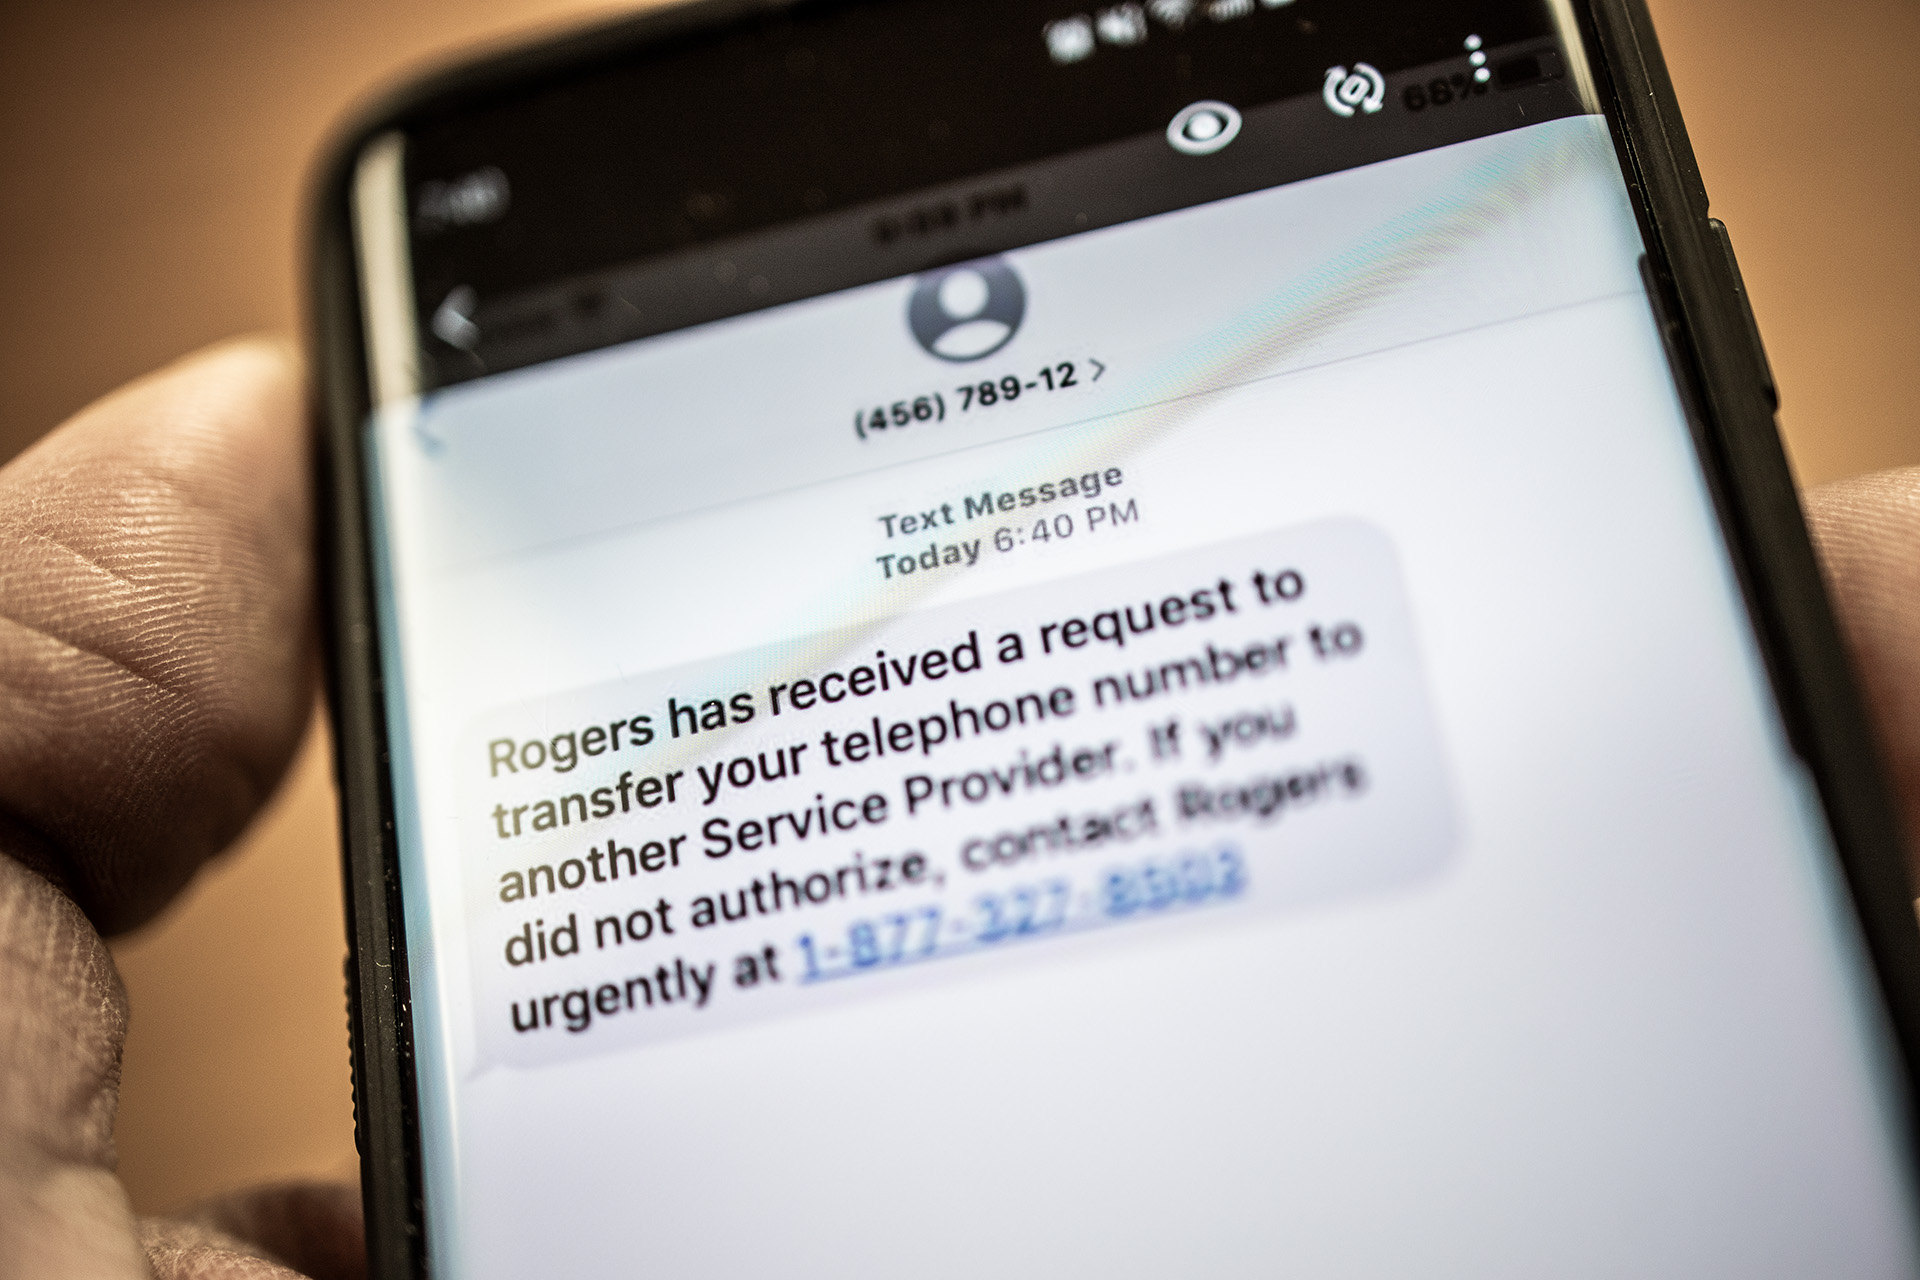 Update: Cellphone Hijacking Scam Hits The Foothills - Okotokstoday.ca